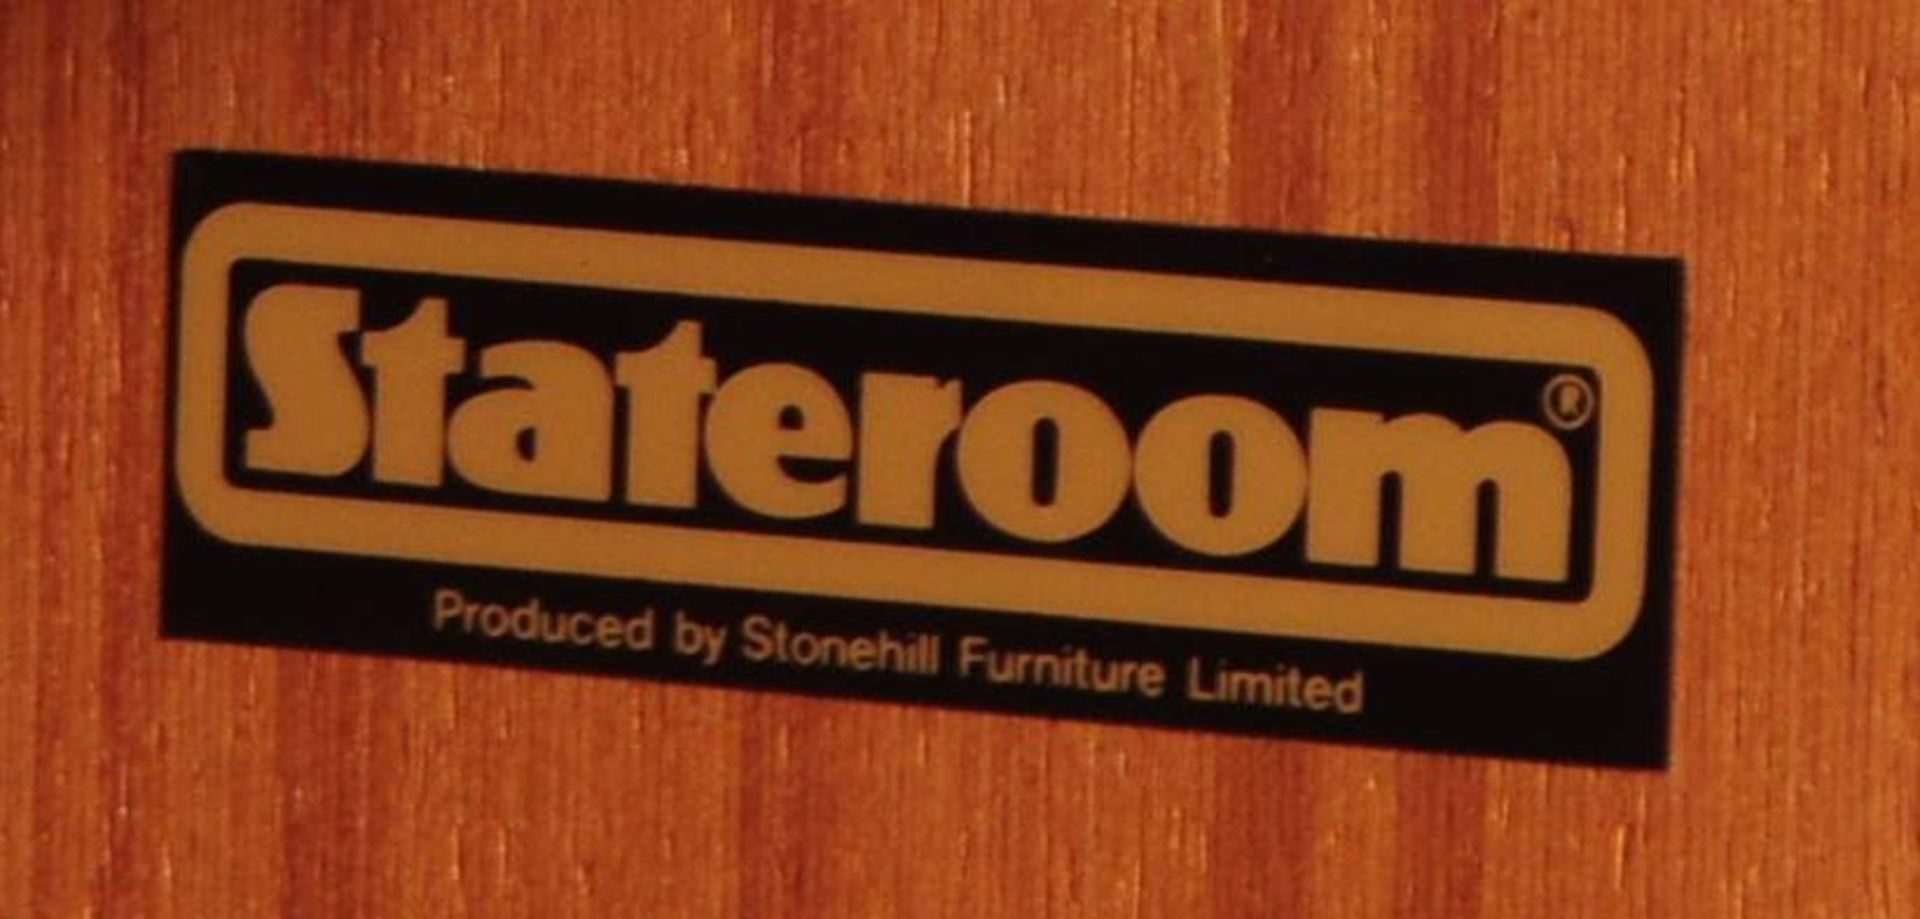 RETRO 1970S TEAK EFFECT SIDEBOARD BY STATEROOM - Image 3 of 7